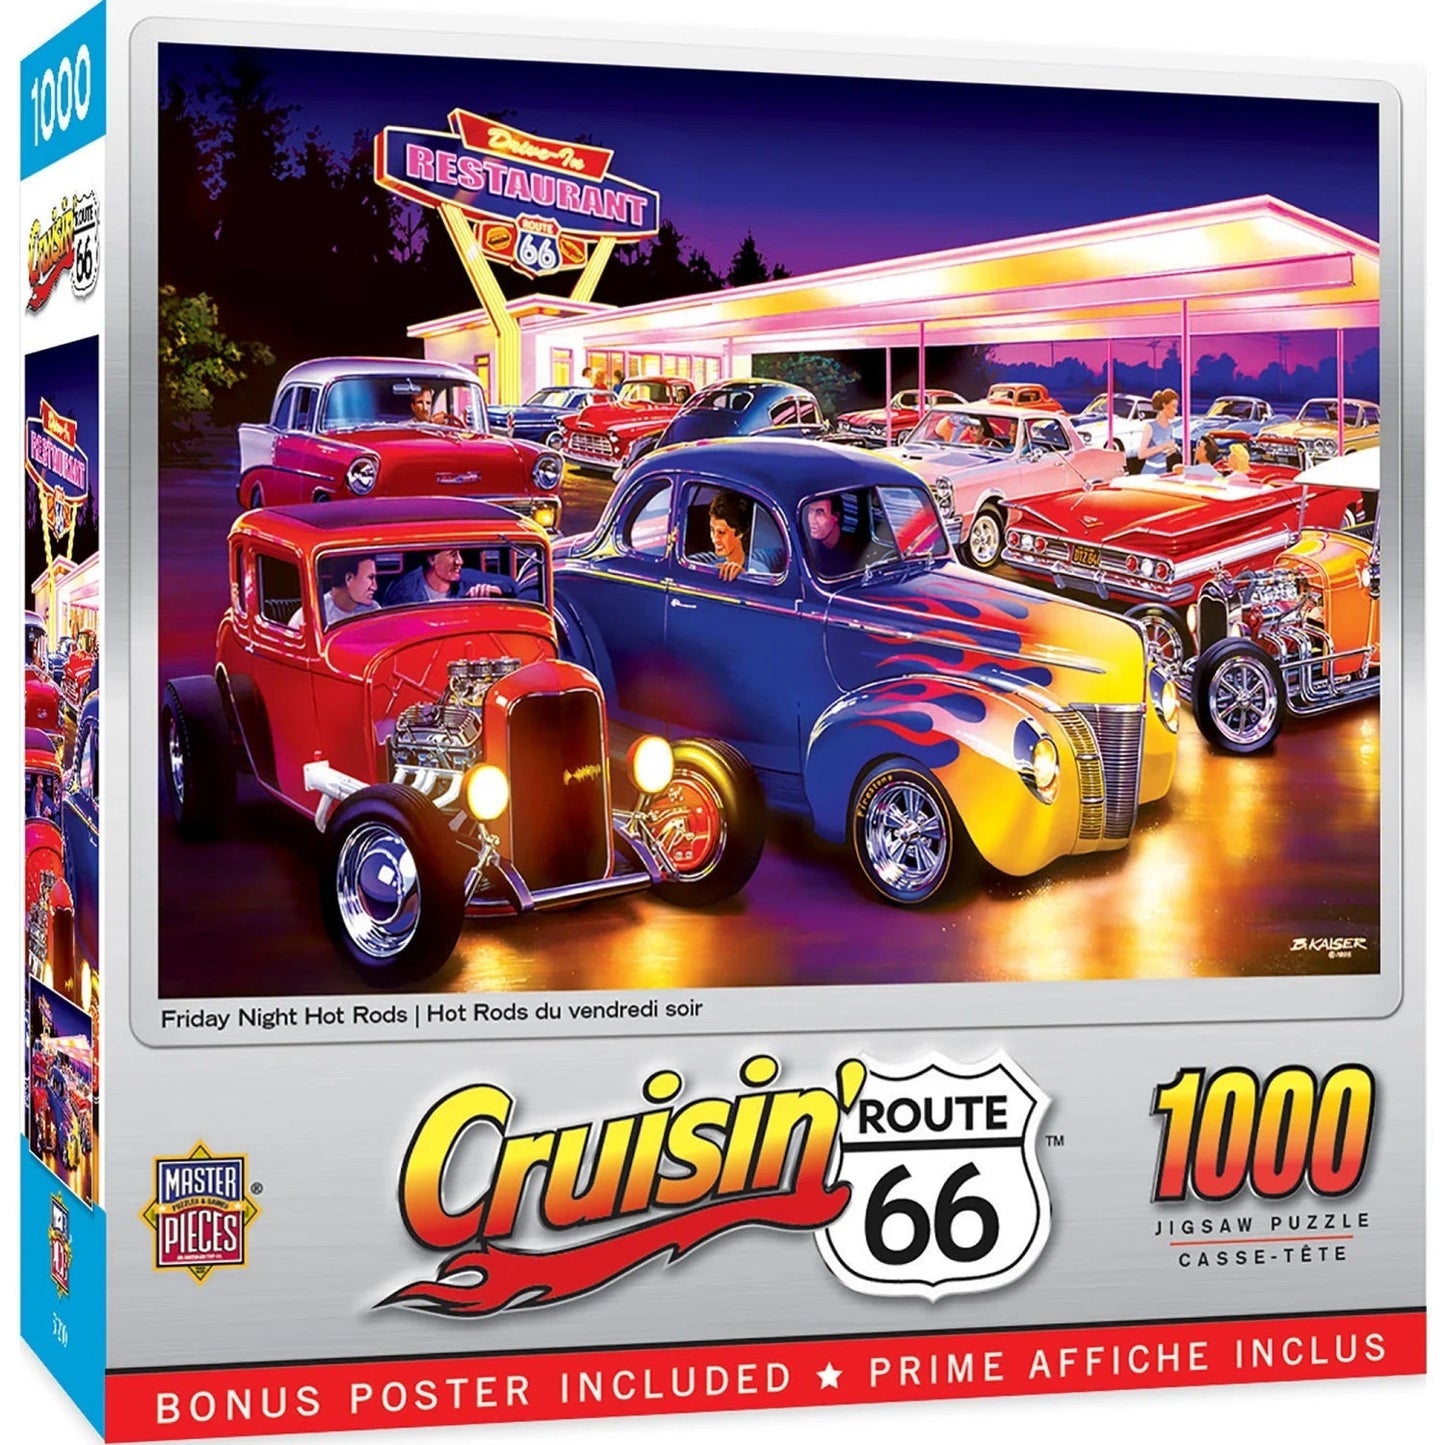  CRUISIN' ROUTE 66 - FRIDAY NIGHT HOT RODS - 1000 PIECE JIGSAW PUZZLE